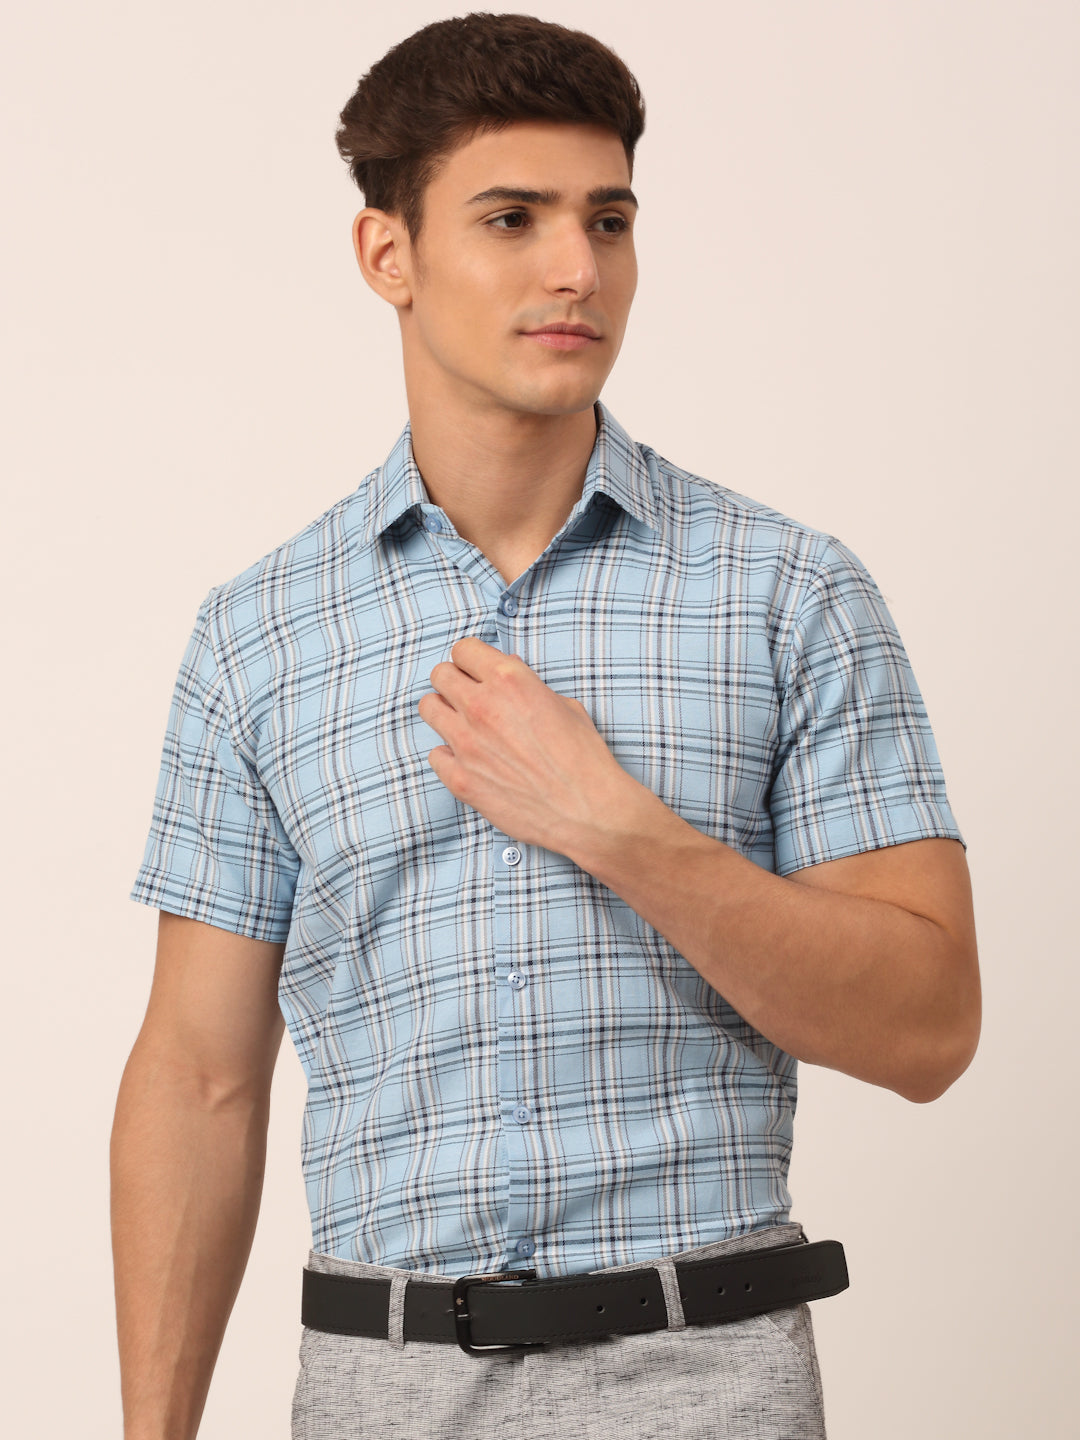 Men's Cotton Checked Half Sleeves Formal Shirts ( SF 815Sky )